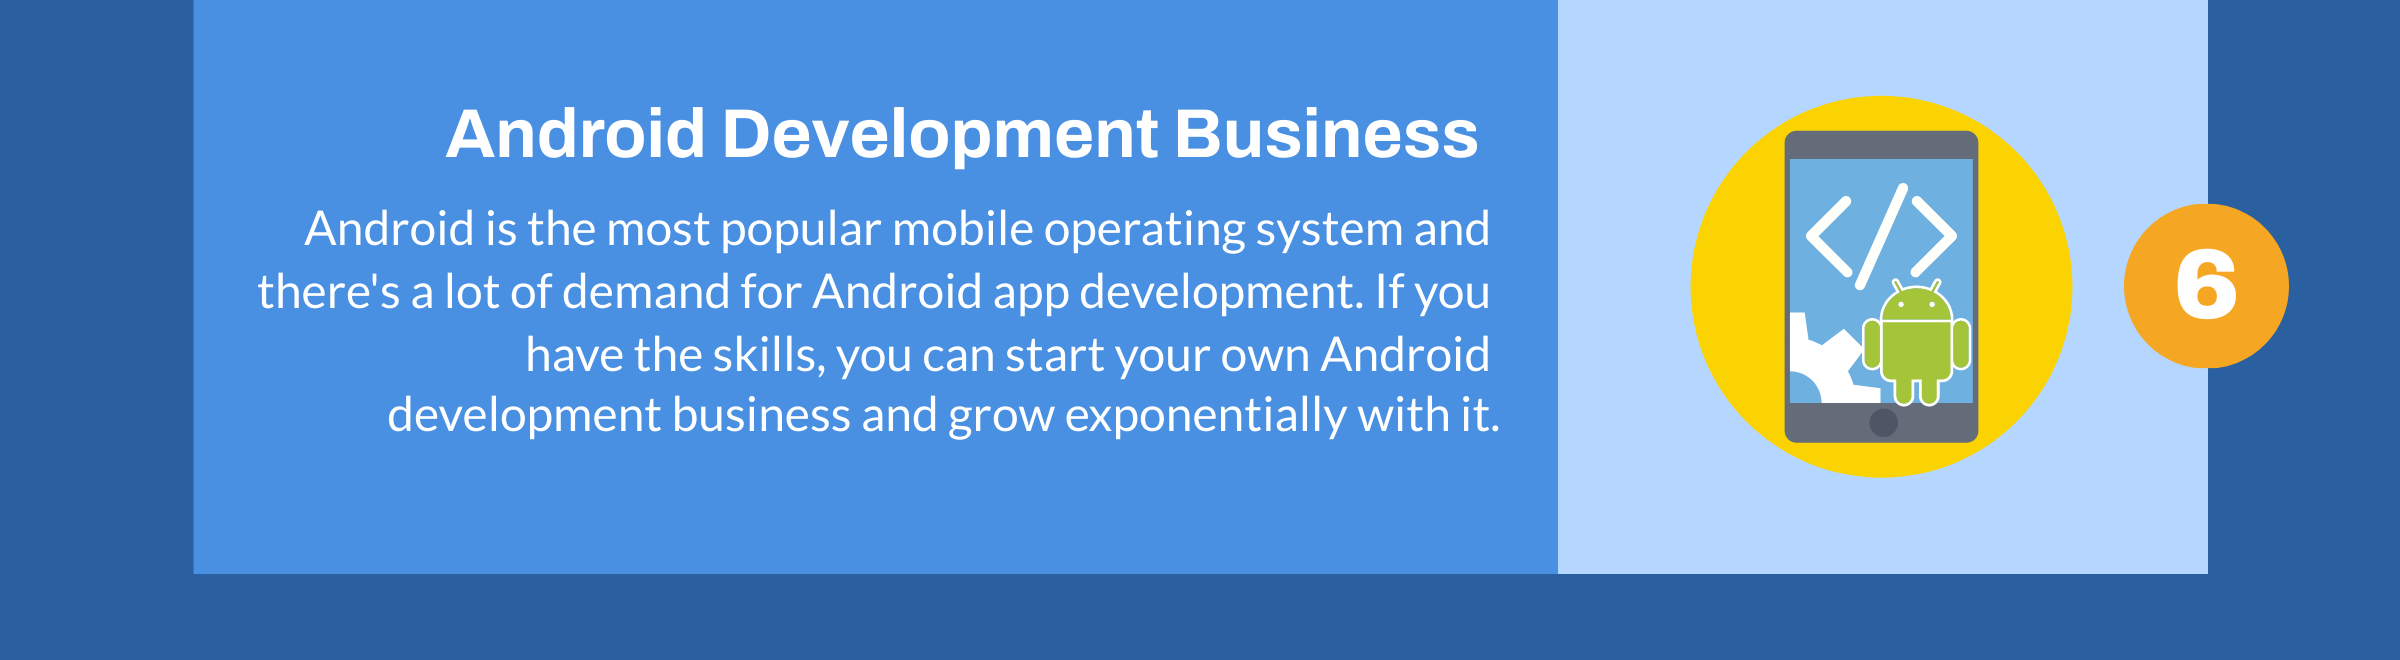 Android Development Business